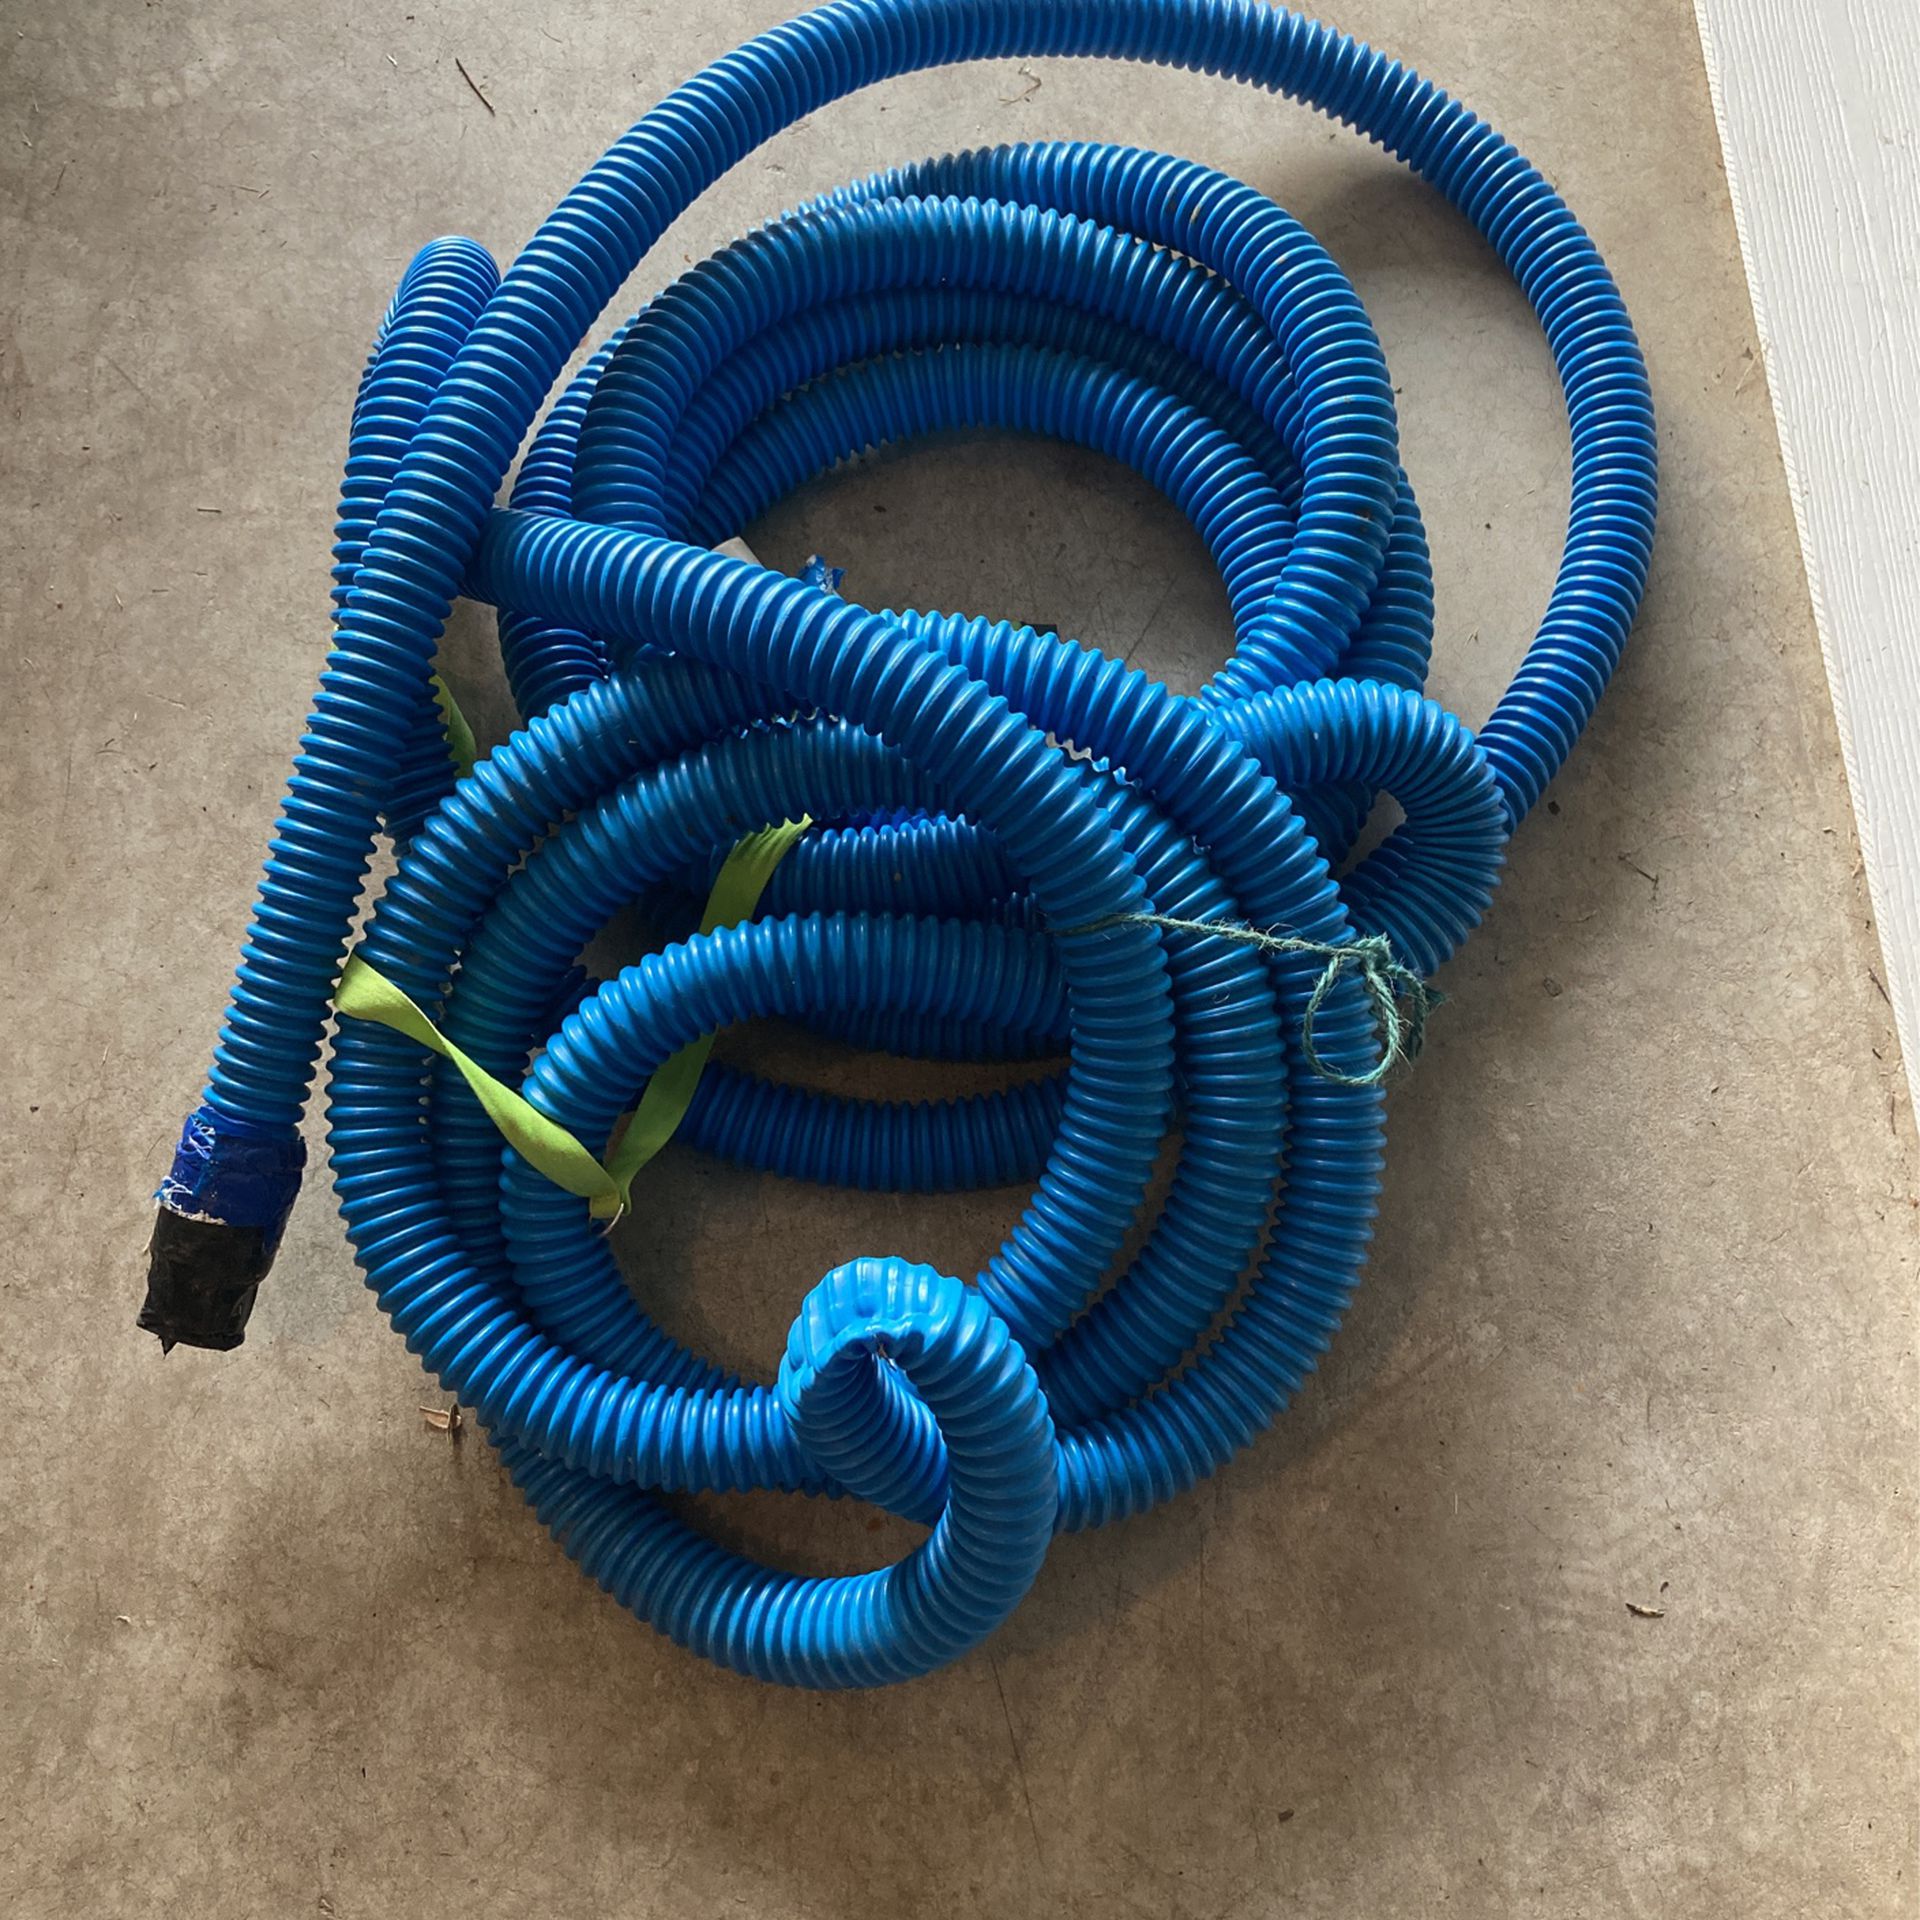 Pool Hoses And Vac/brush - Very Used-$20